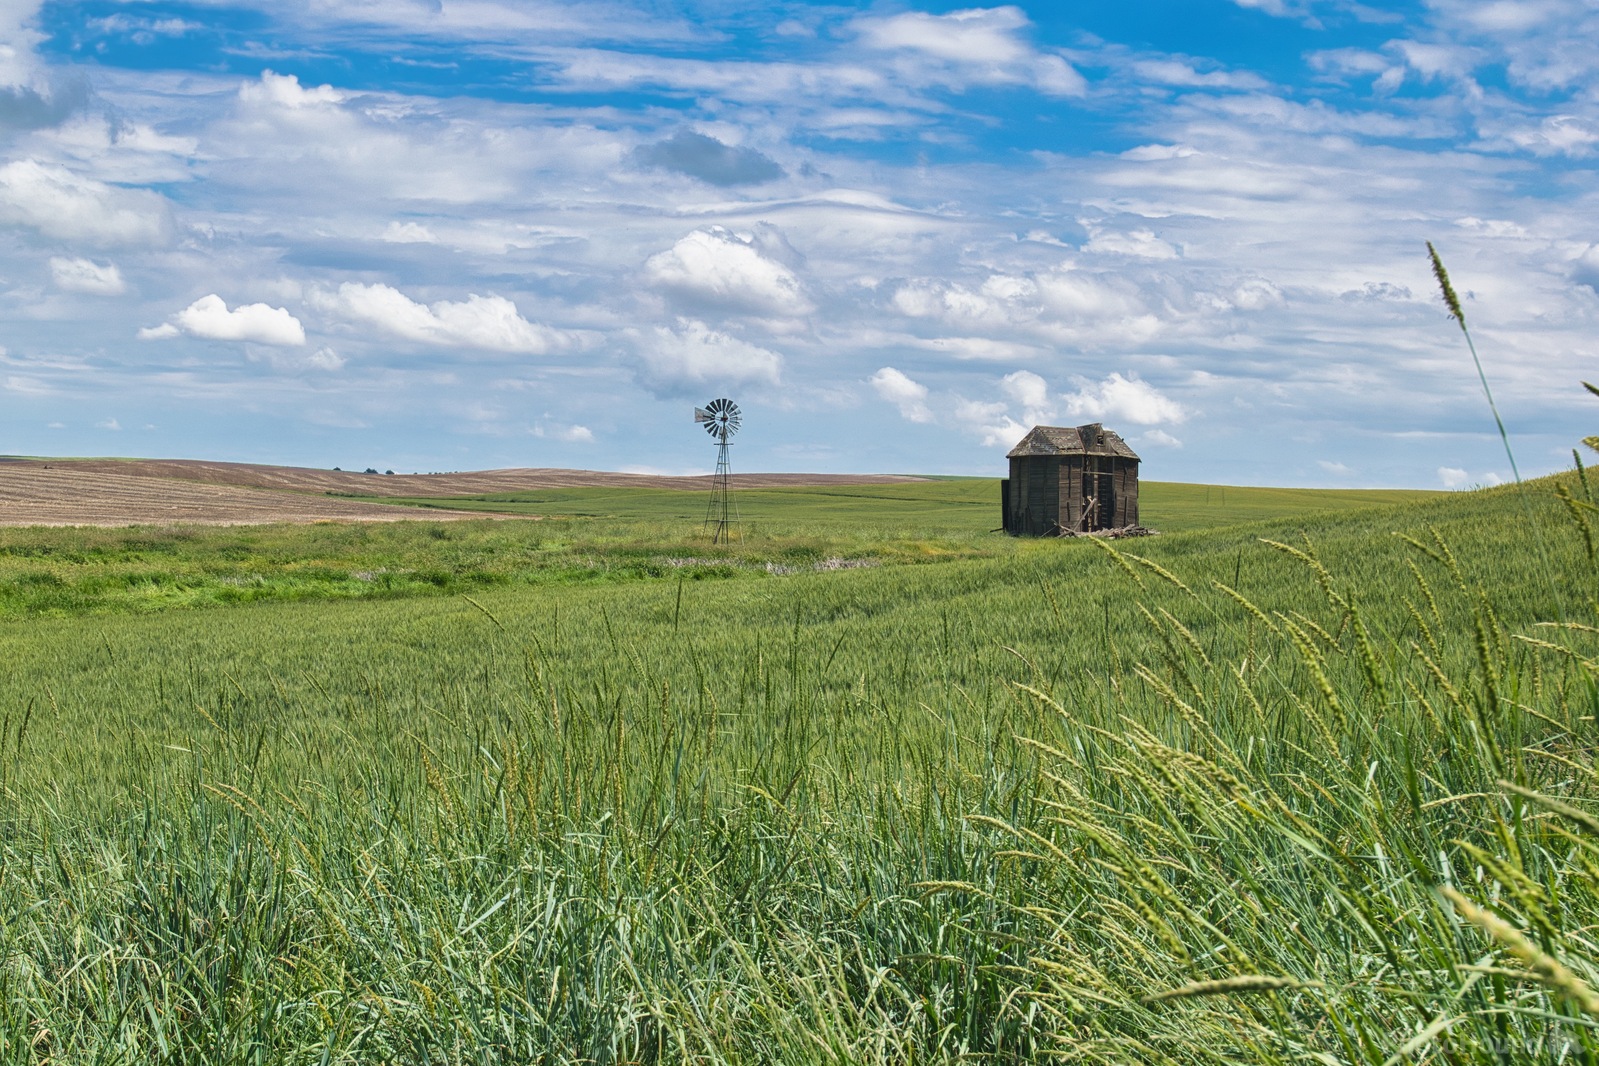 Image of Grant County Barn and Windmill by Steve West